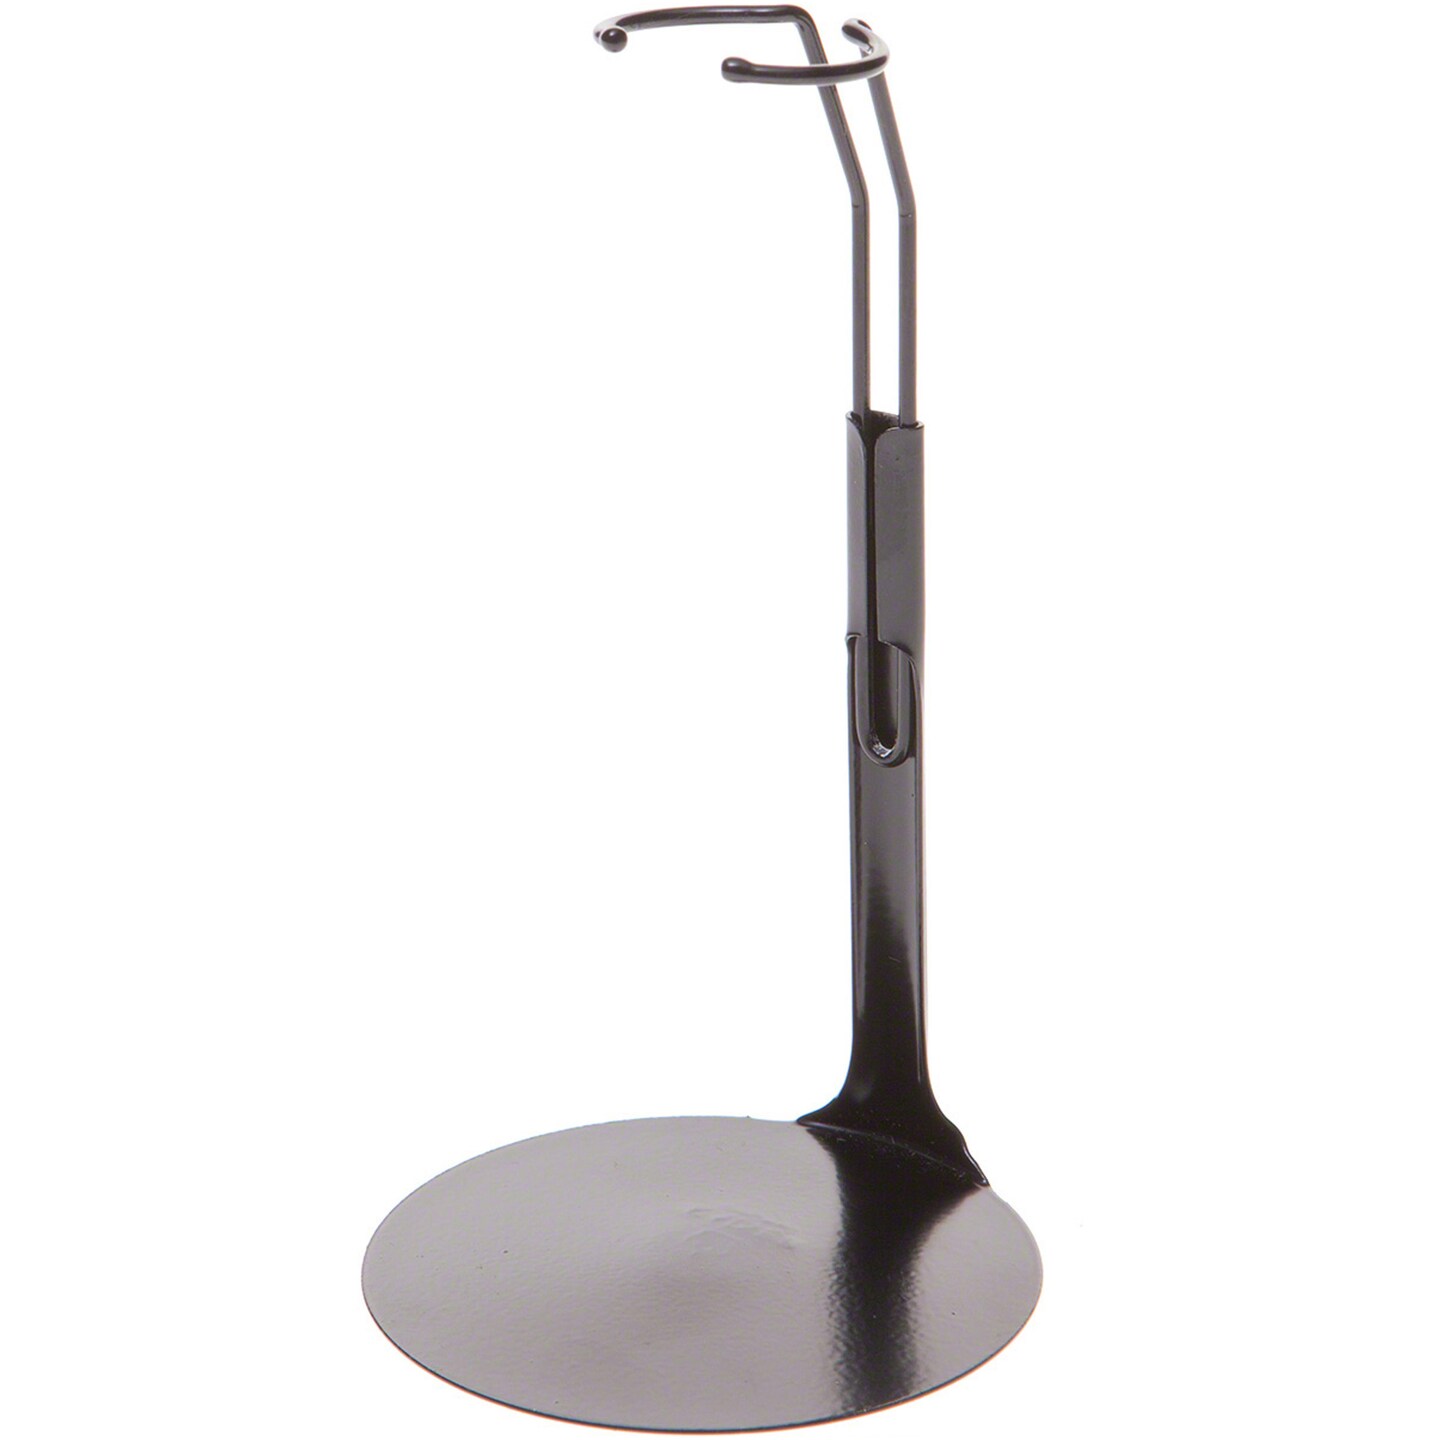 Kaiser 20SMB Black Adjustable Doll Stand, fits 7 to 8 inch Dolls or Action Figures, waist width adjusts from 1.125 to 1.375 inches